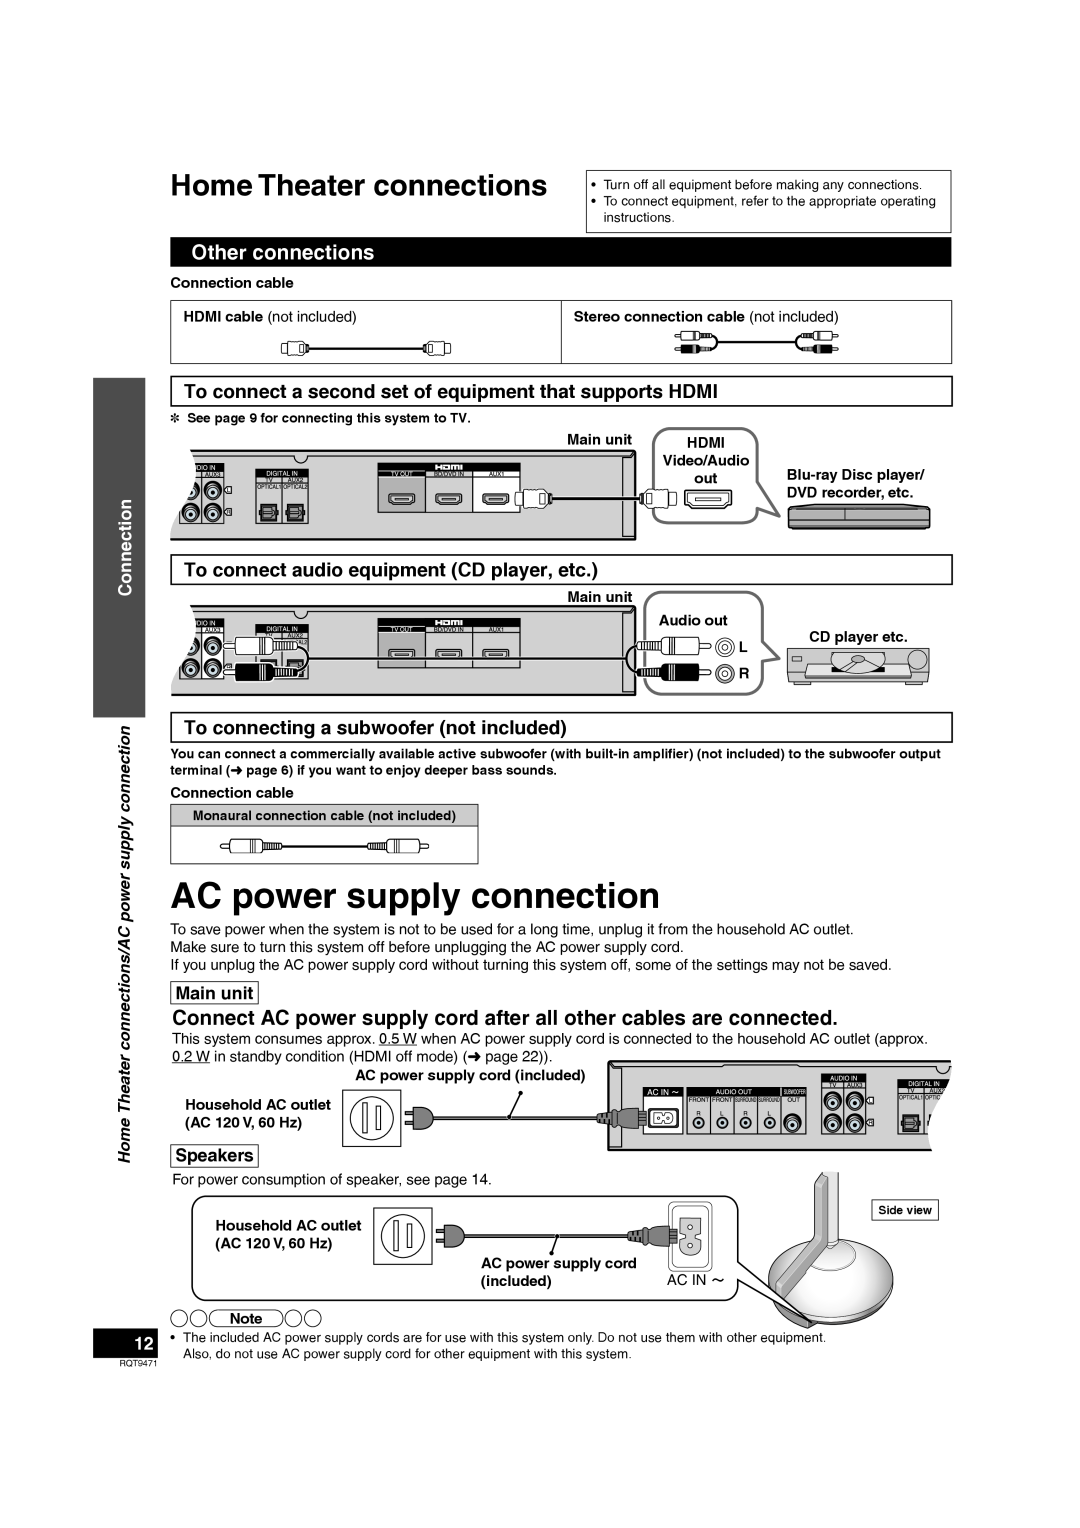 Panasonic SC-ZT1 AC power supply connection, Other connections, To connect audio equipment CD player, etc, Connection 